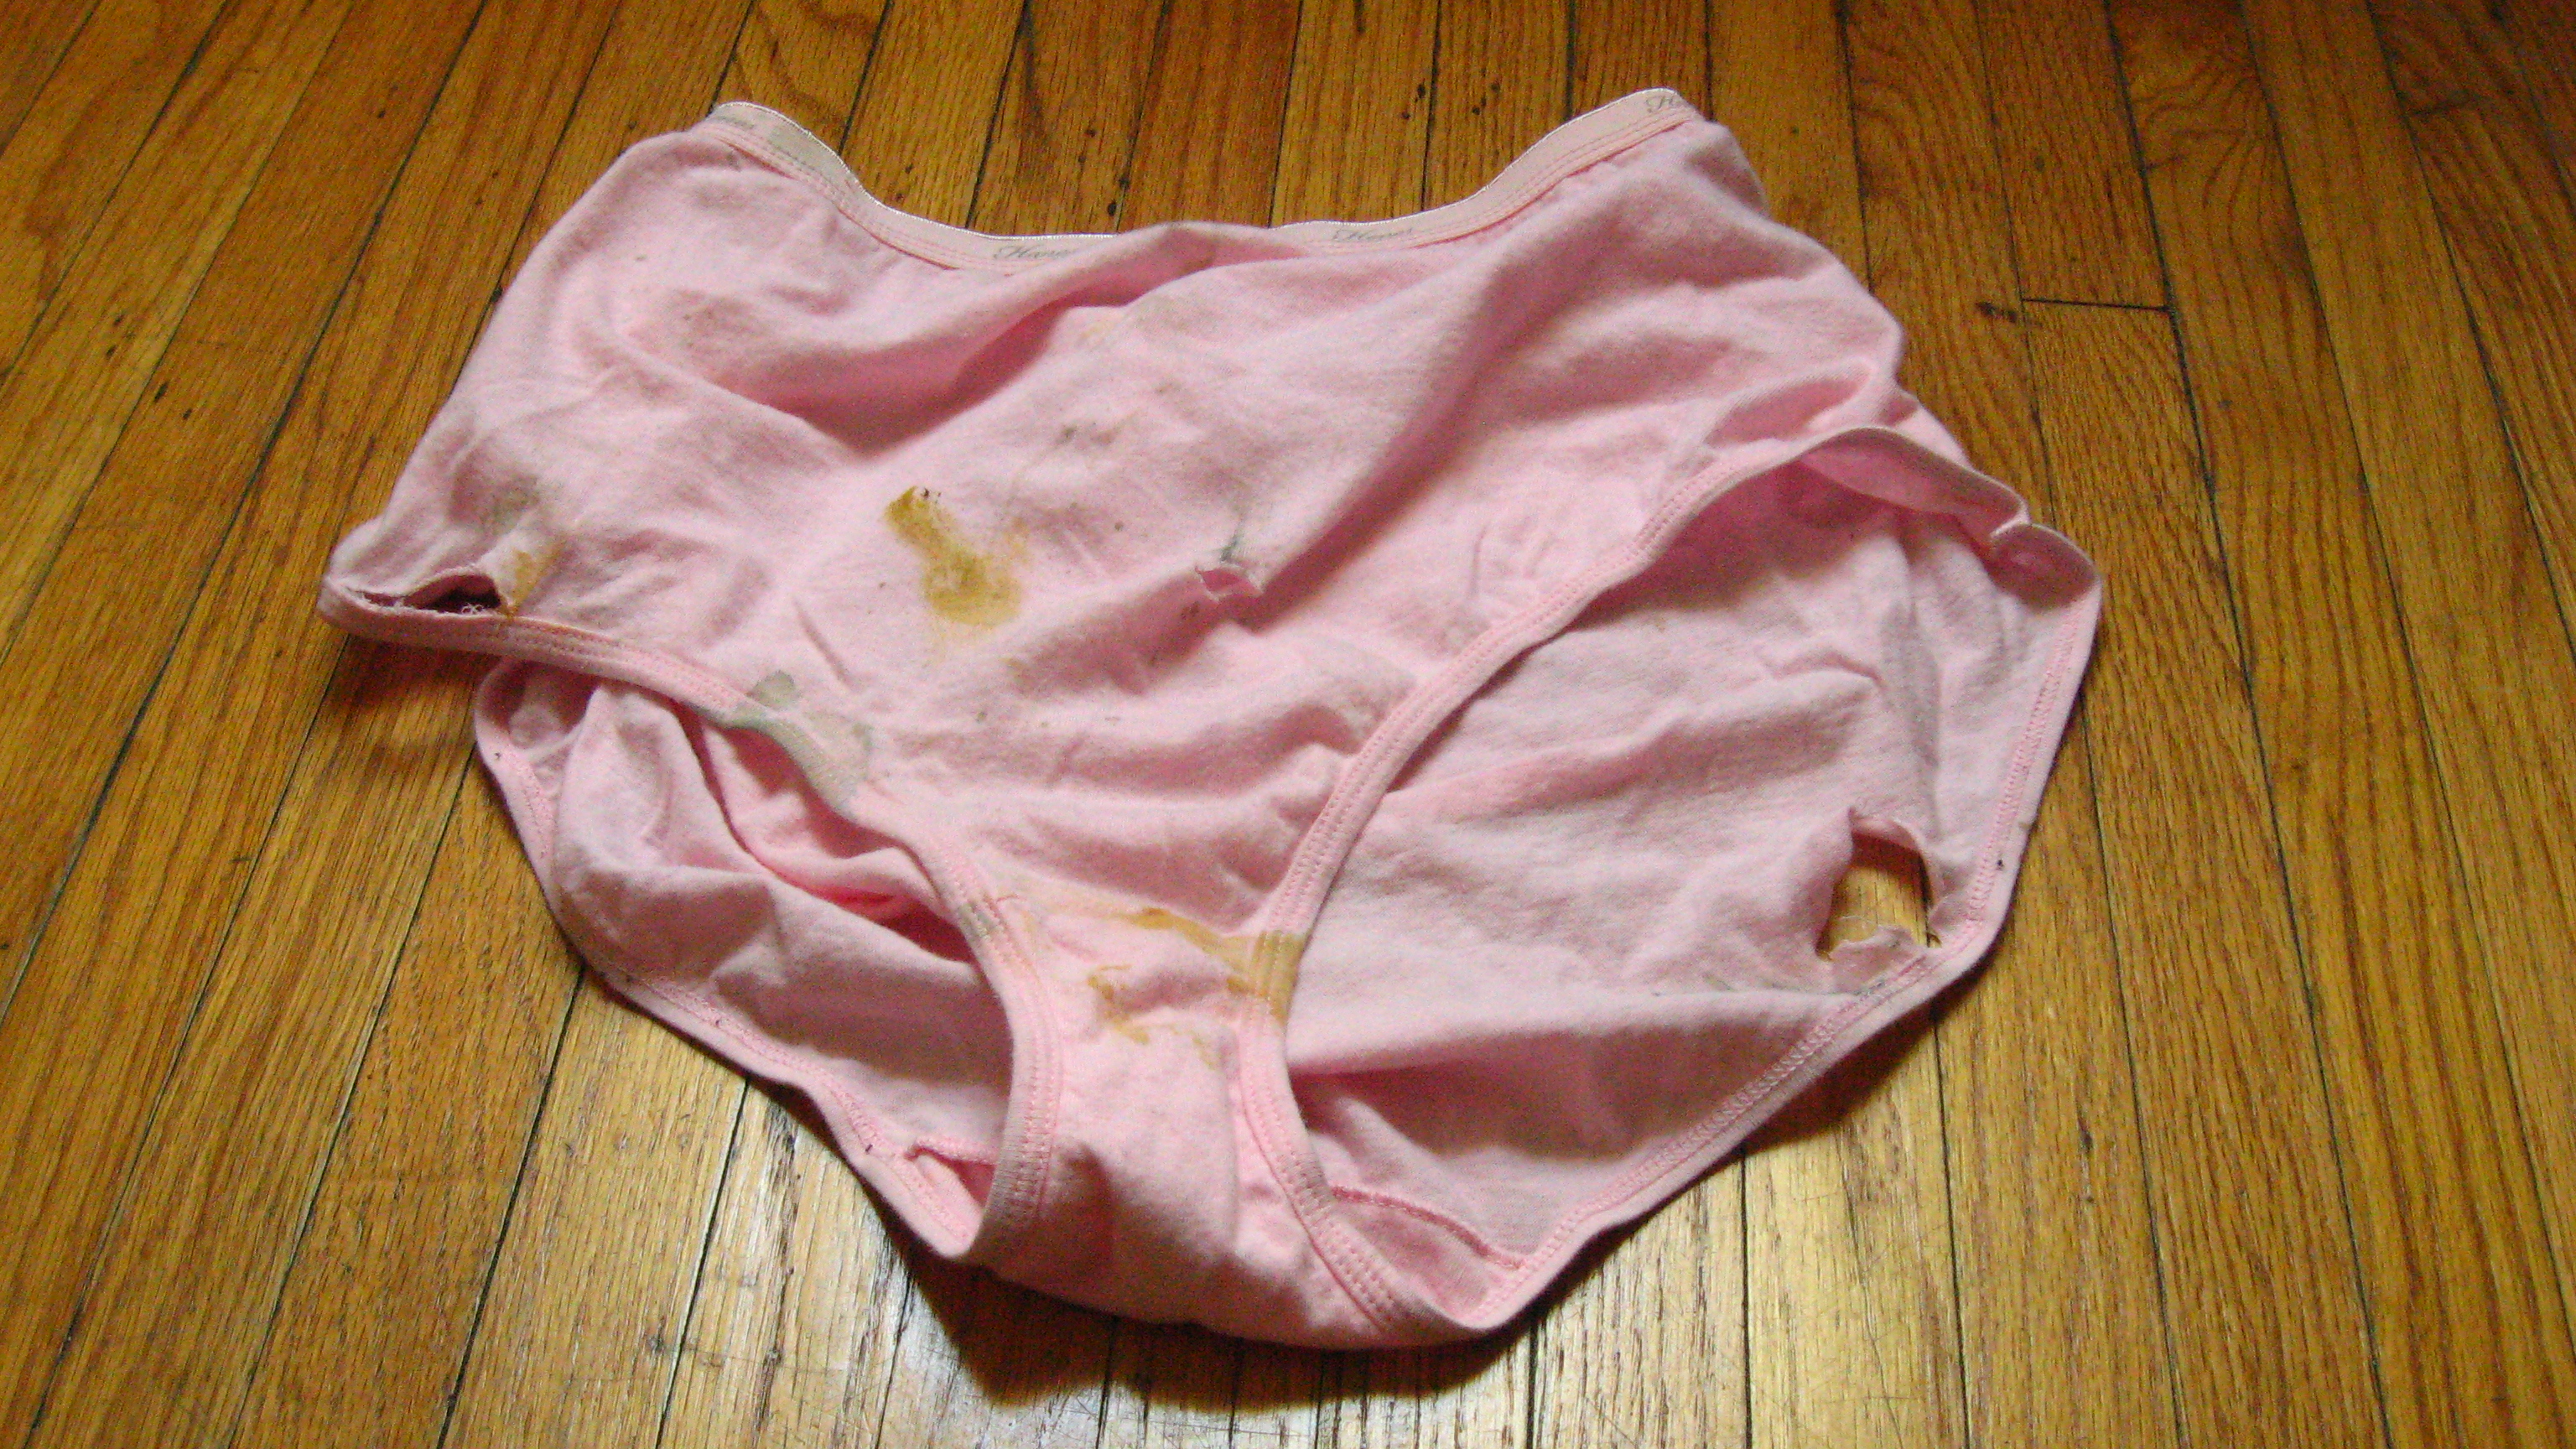 The day a raggedy pair of old dirty underpants came flying through the wind...